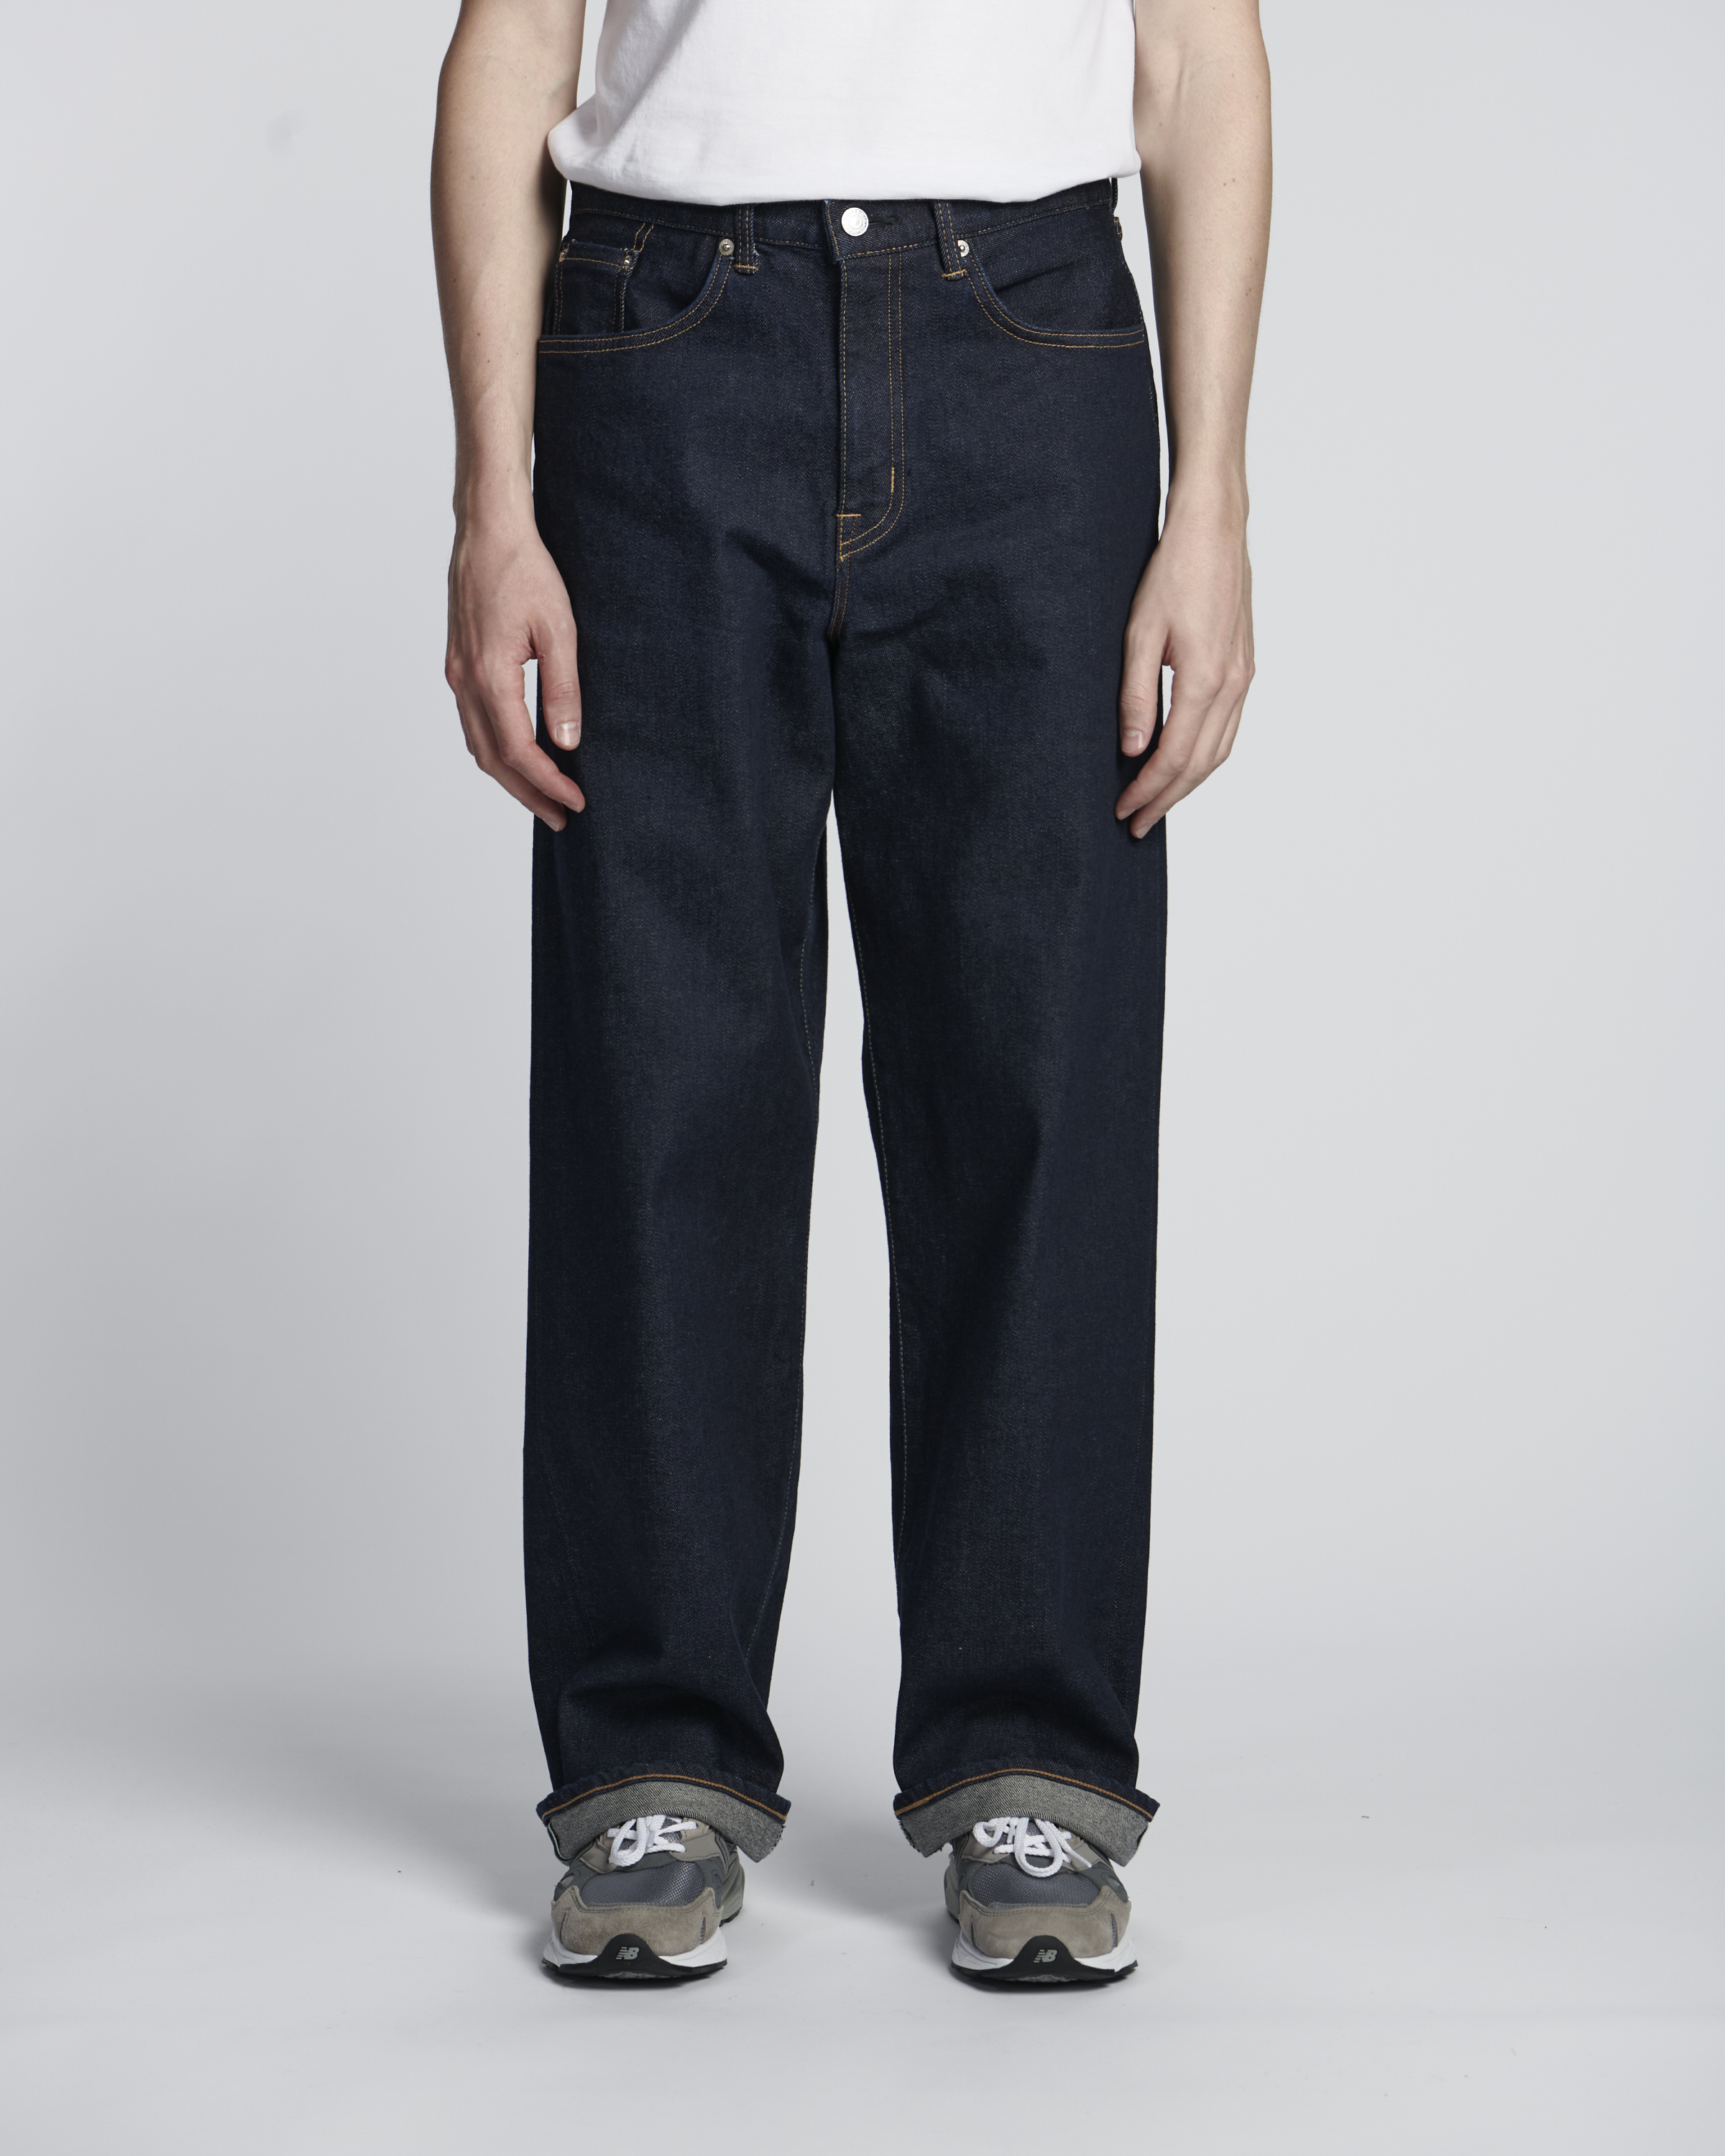 Japanese Selvedge Denim Jeans and Clothing - EDWIN